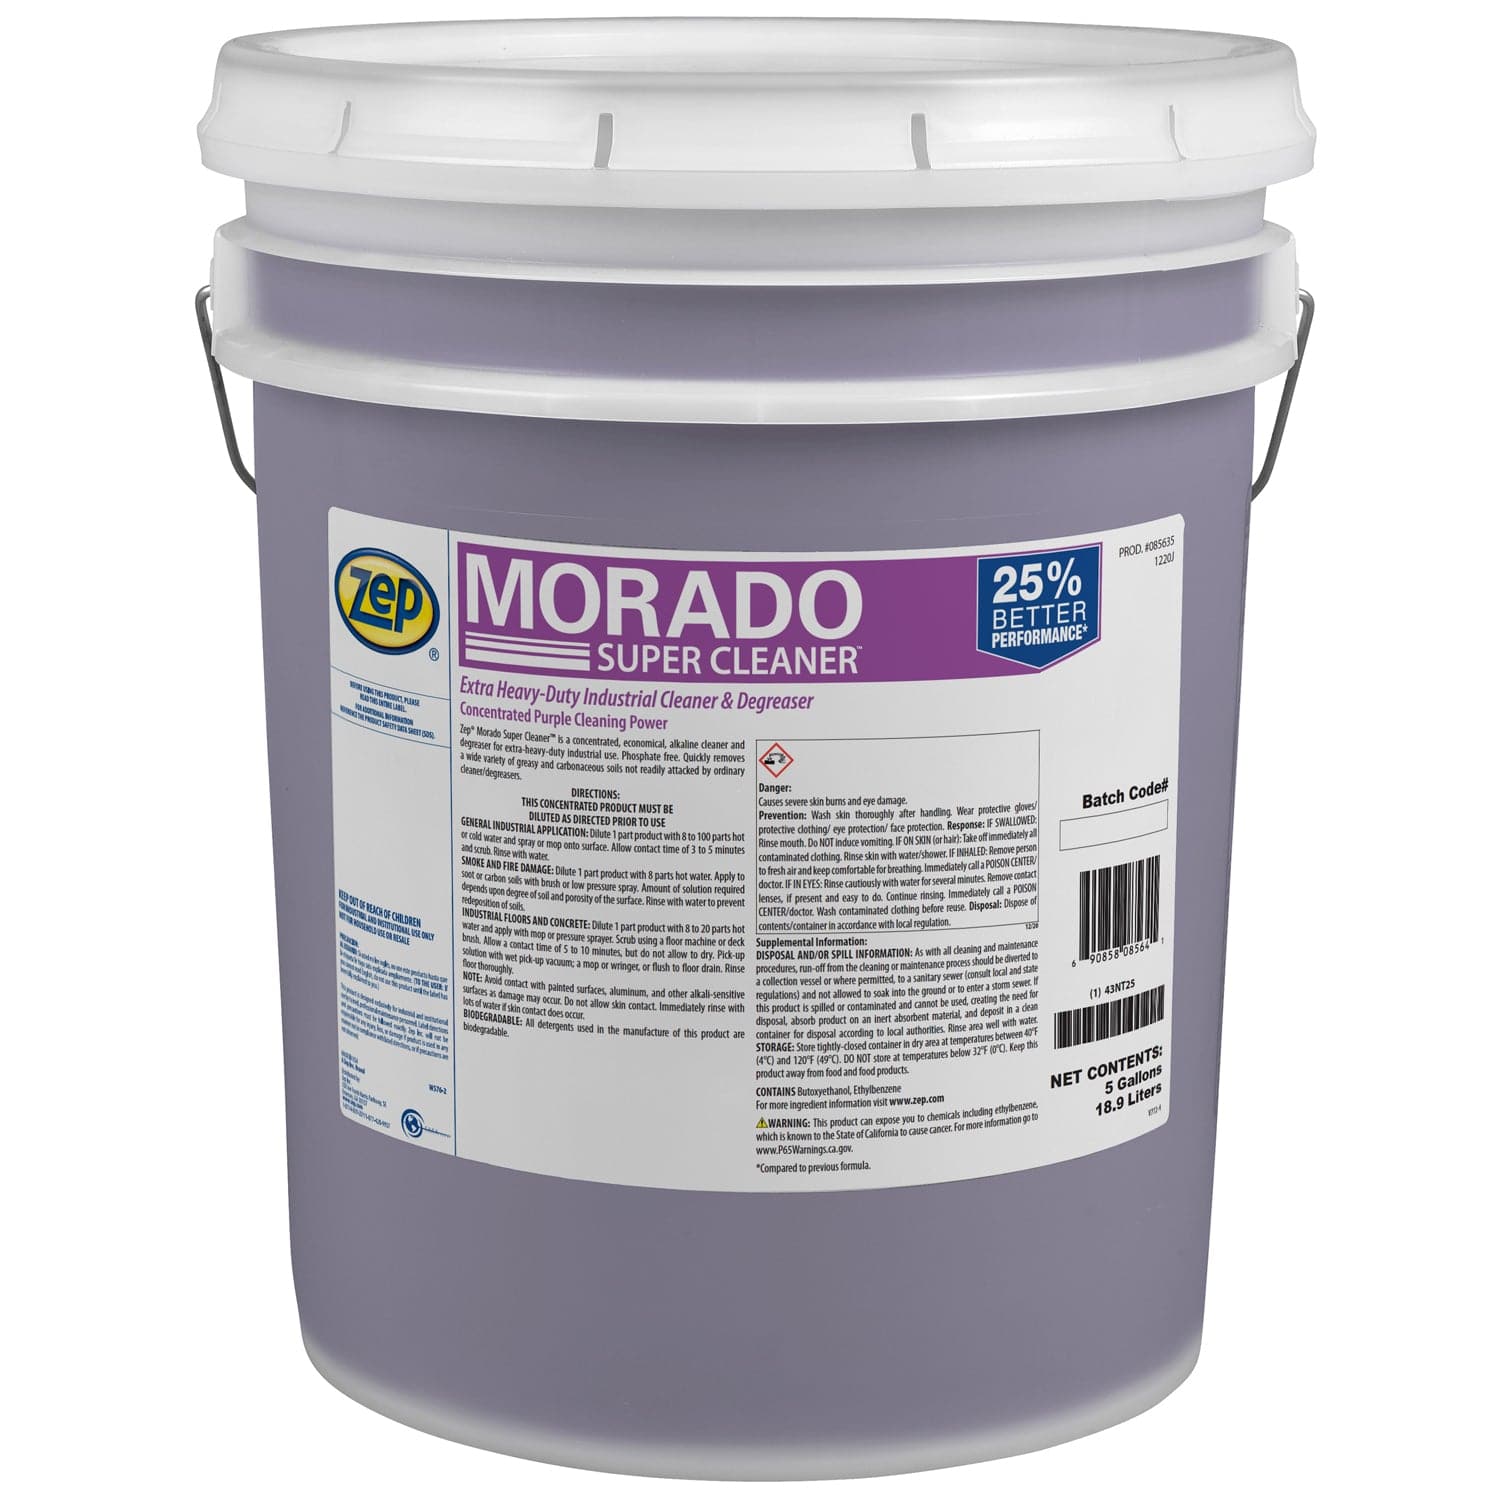 Image for Morado Extra Heavy-Duty Industrial Concentrated Cleaner & Degreaser - 5 Gallon